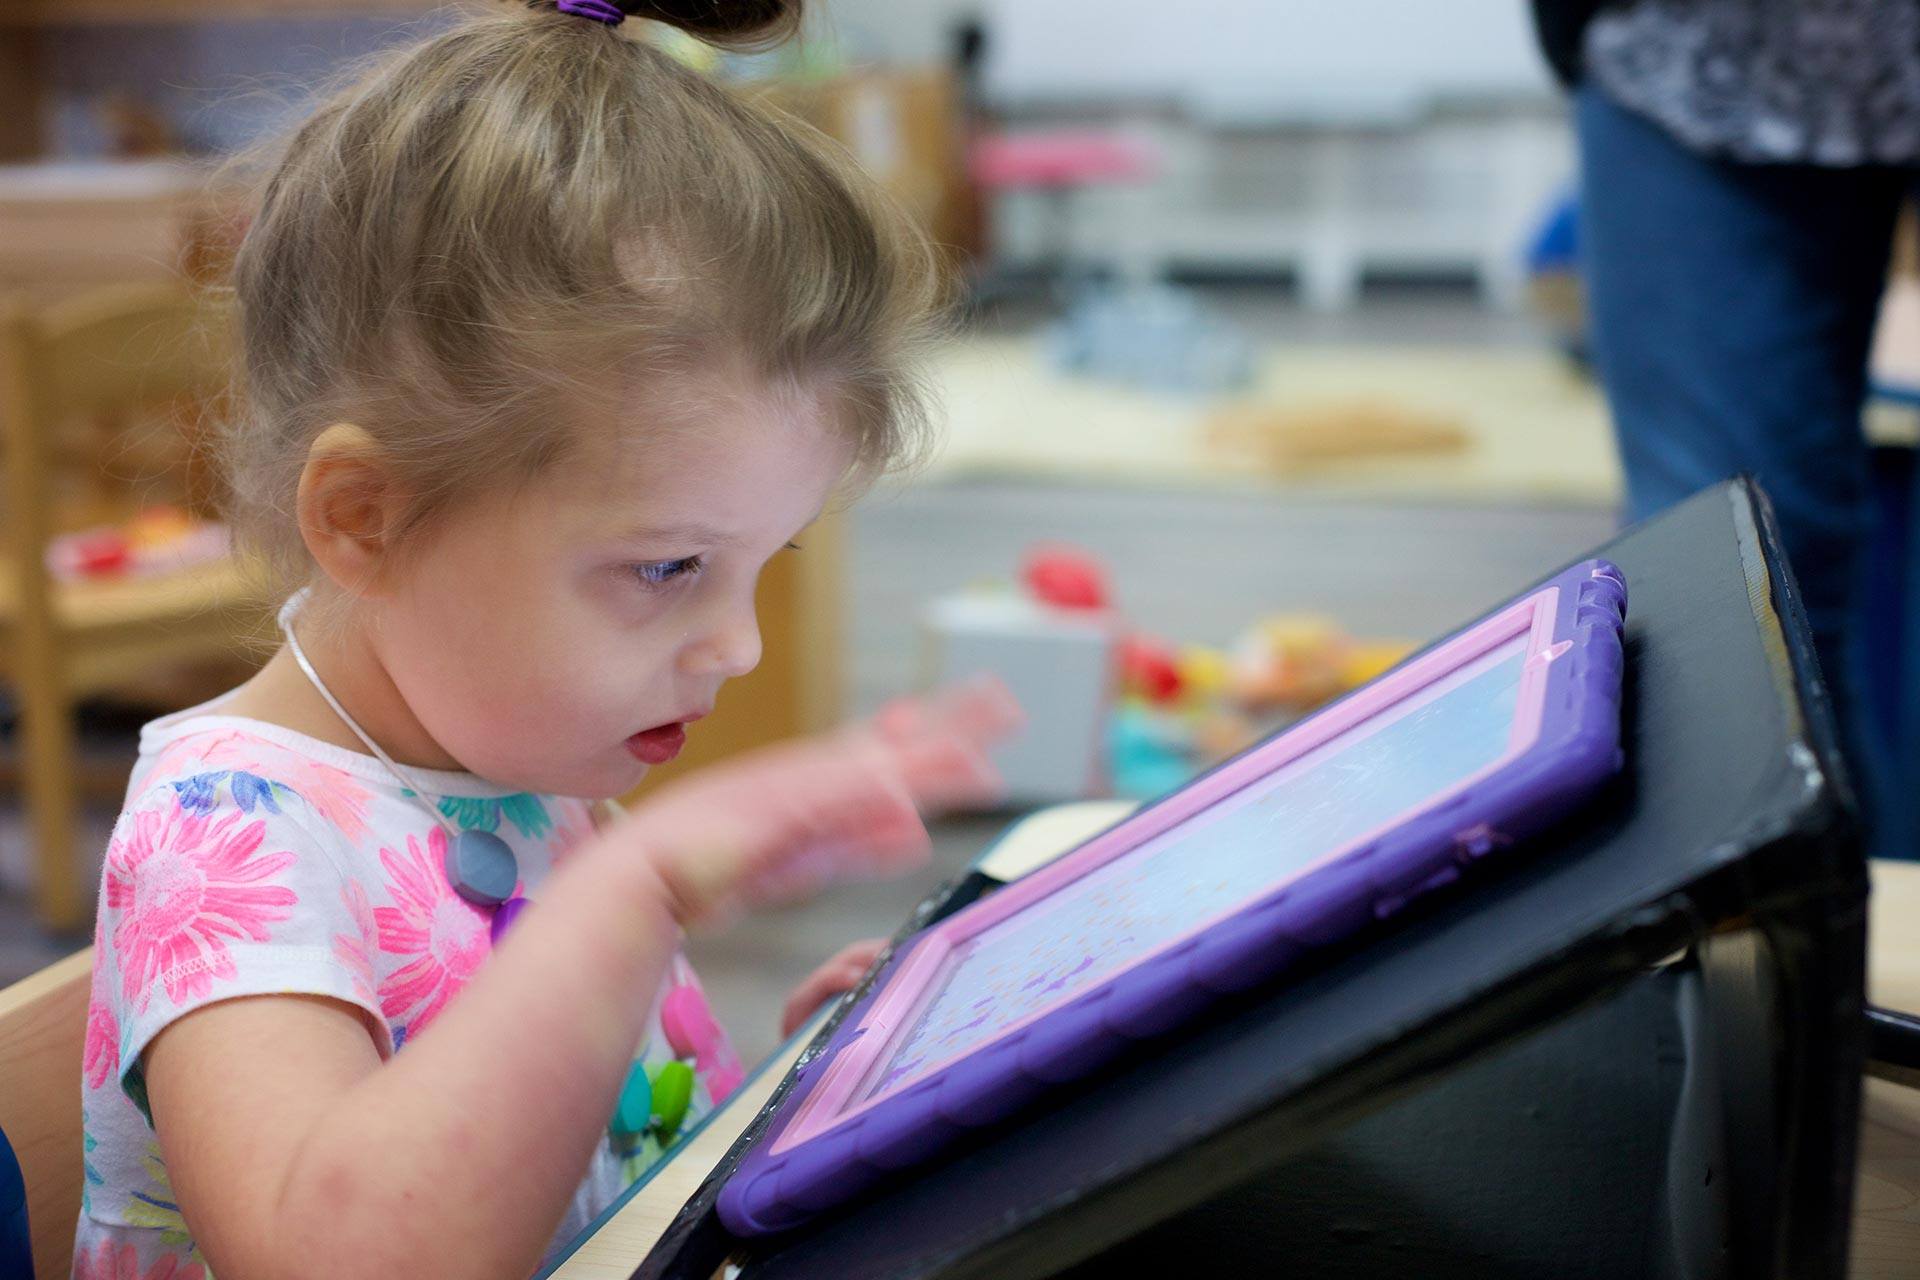 Toddler playing with ipad in classroom